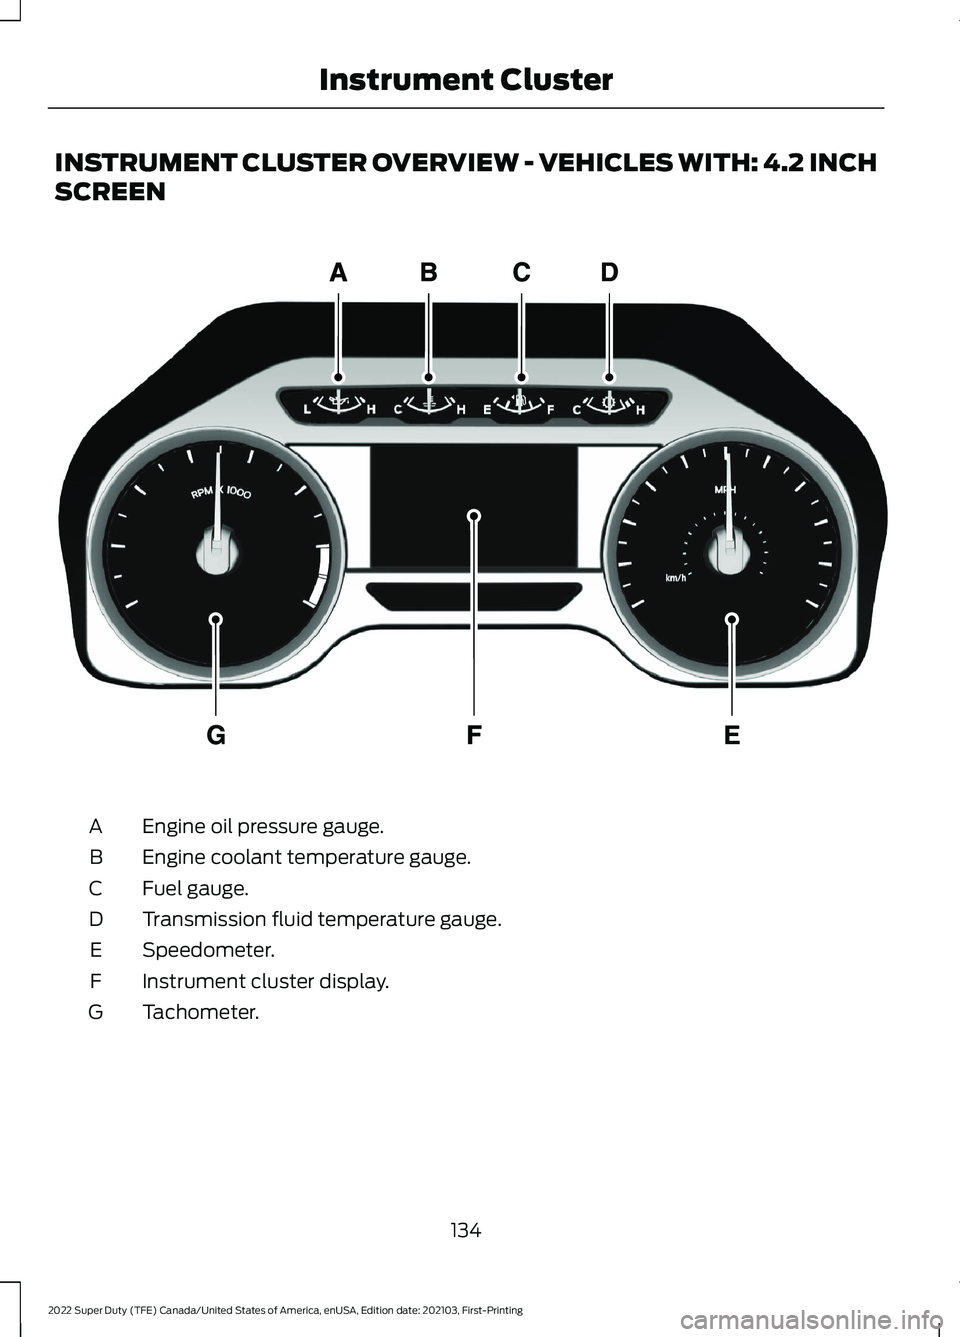 FORD F-250 2022  Owners Manual INSTRUMENT CLUSTER OVERVIEW - VEHICLES WITH: 4.2 INCH
SCREEN
Engine oil pressure gauge.
A
Engine coolant temperature gauge.
B
Fuel gauge.
C
Transmission fluid temperature gauge.
D
Speedometer.
E
Instr